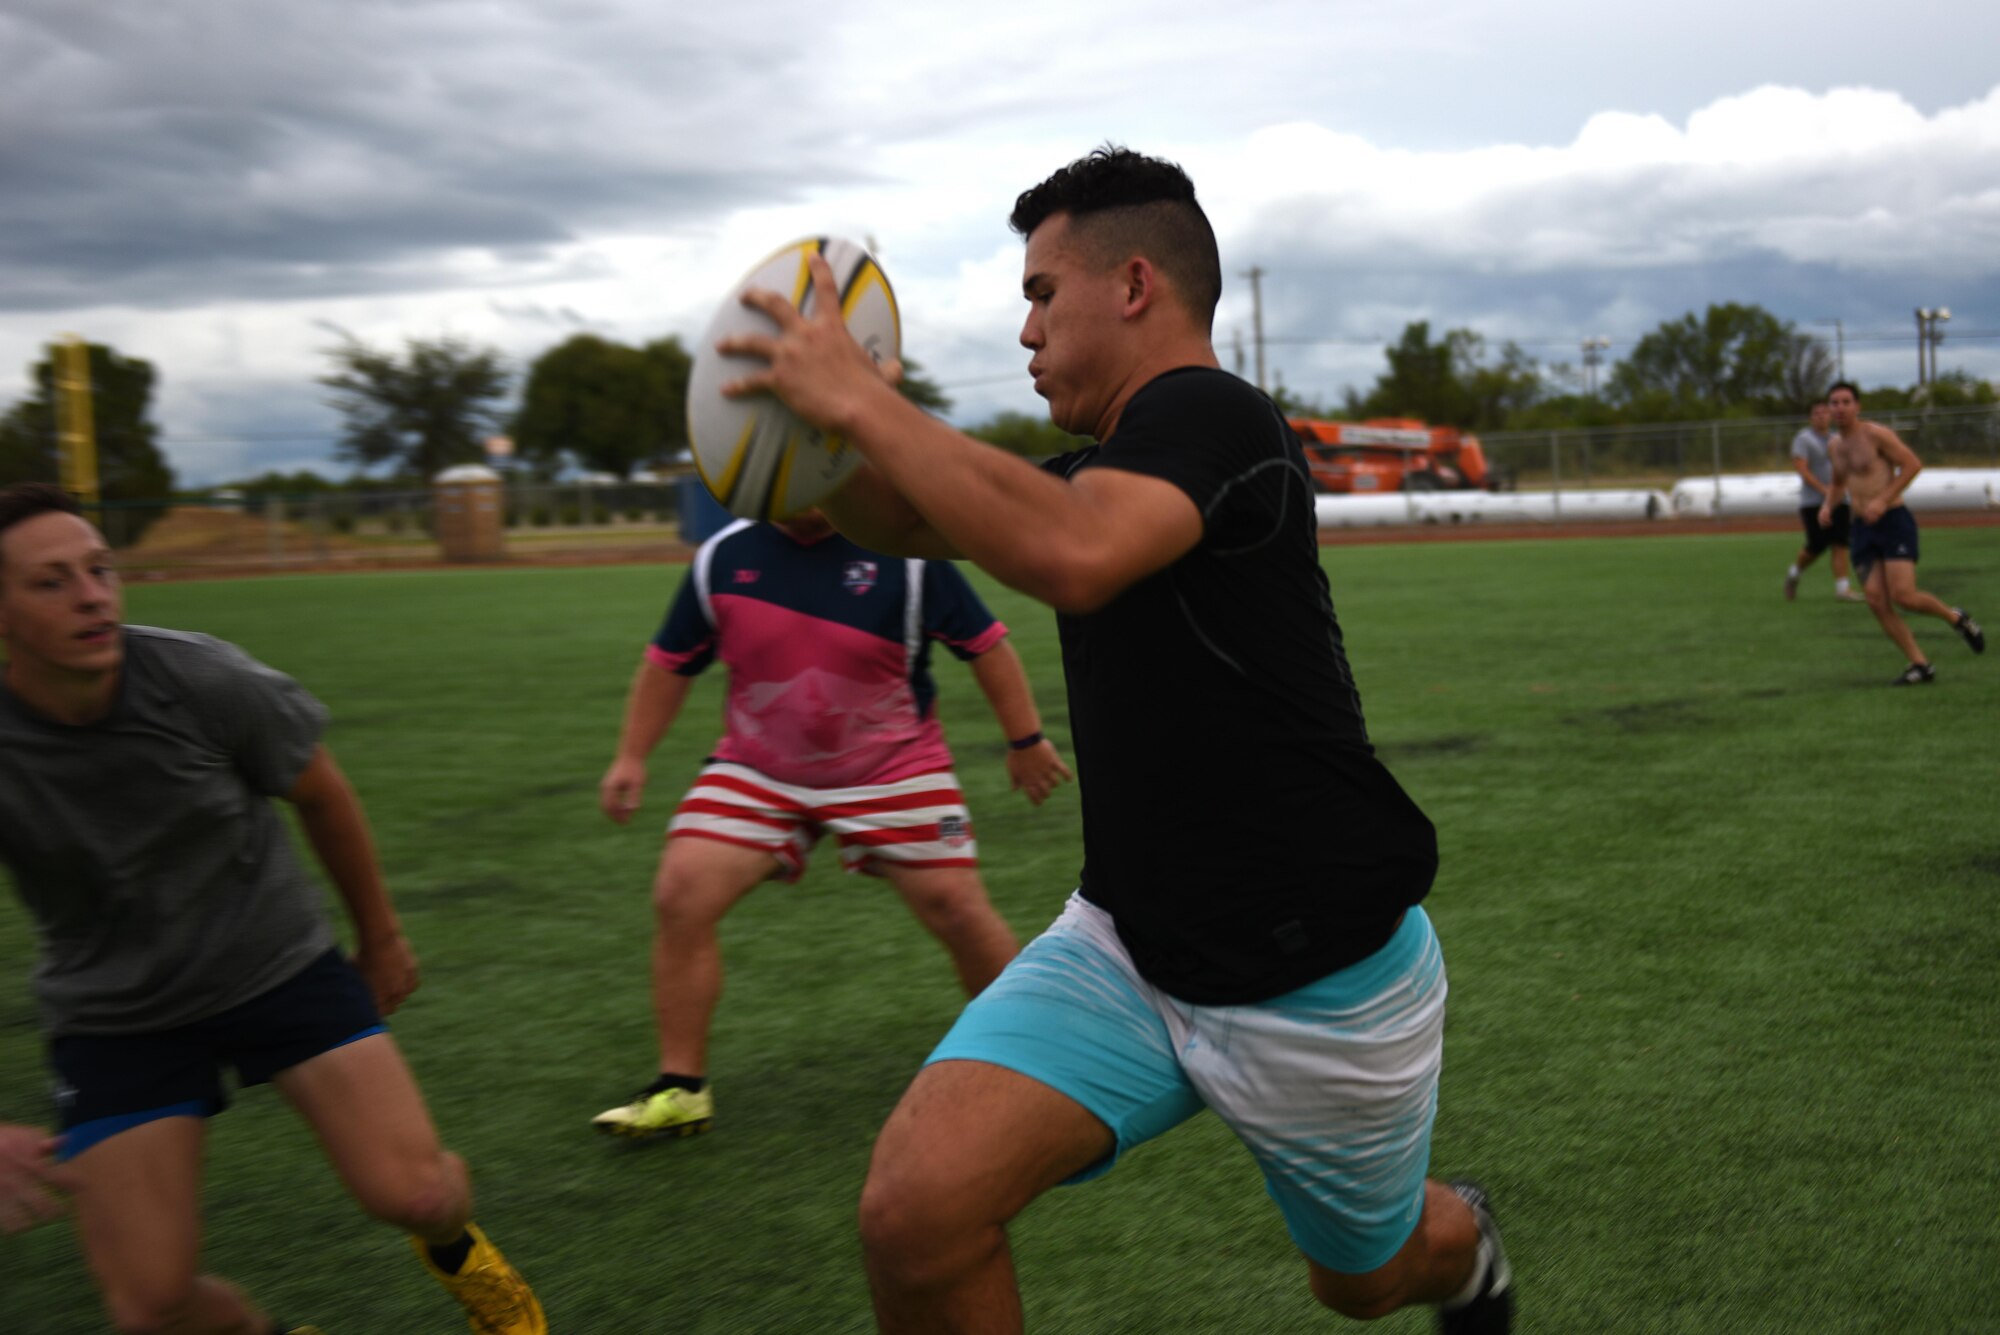 Rugby club members compete against each other during practice on the base softball field on Goodfellow Air Force Base, Texas, Aug. 17, 2016. In order to keep the players from being injured, the practice games are played by two-hand touches to simulate a tackle. (U.S. Air Force photo by Airman 1st Class Caelynn Ferguson/Released)